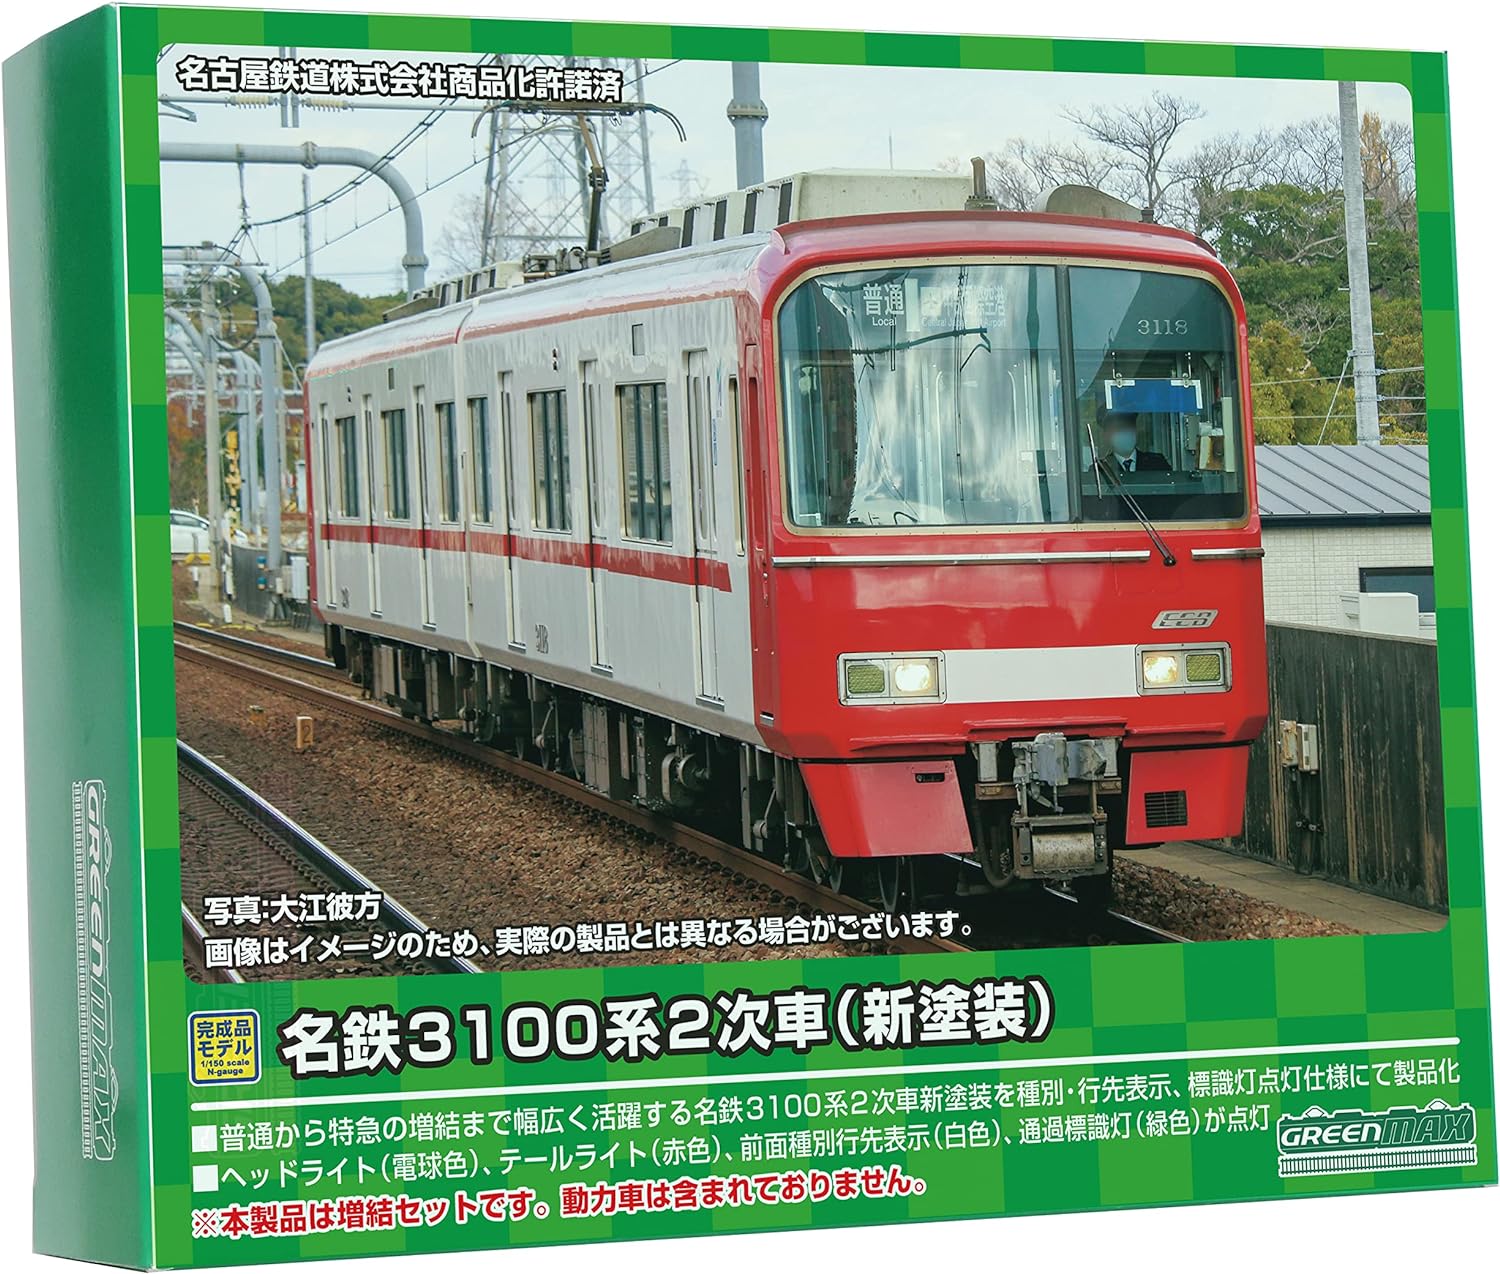 GreenMax 31721 N Gauge Meitetsu 3100 Series Secondary Car, New Paint, 3118 Formation, Extra 2-Car Construction Set (No Power) - BanzaiHobby